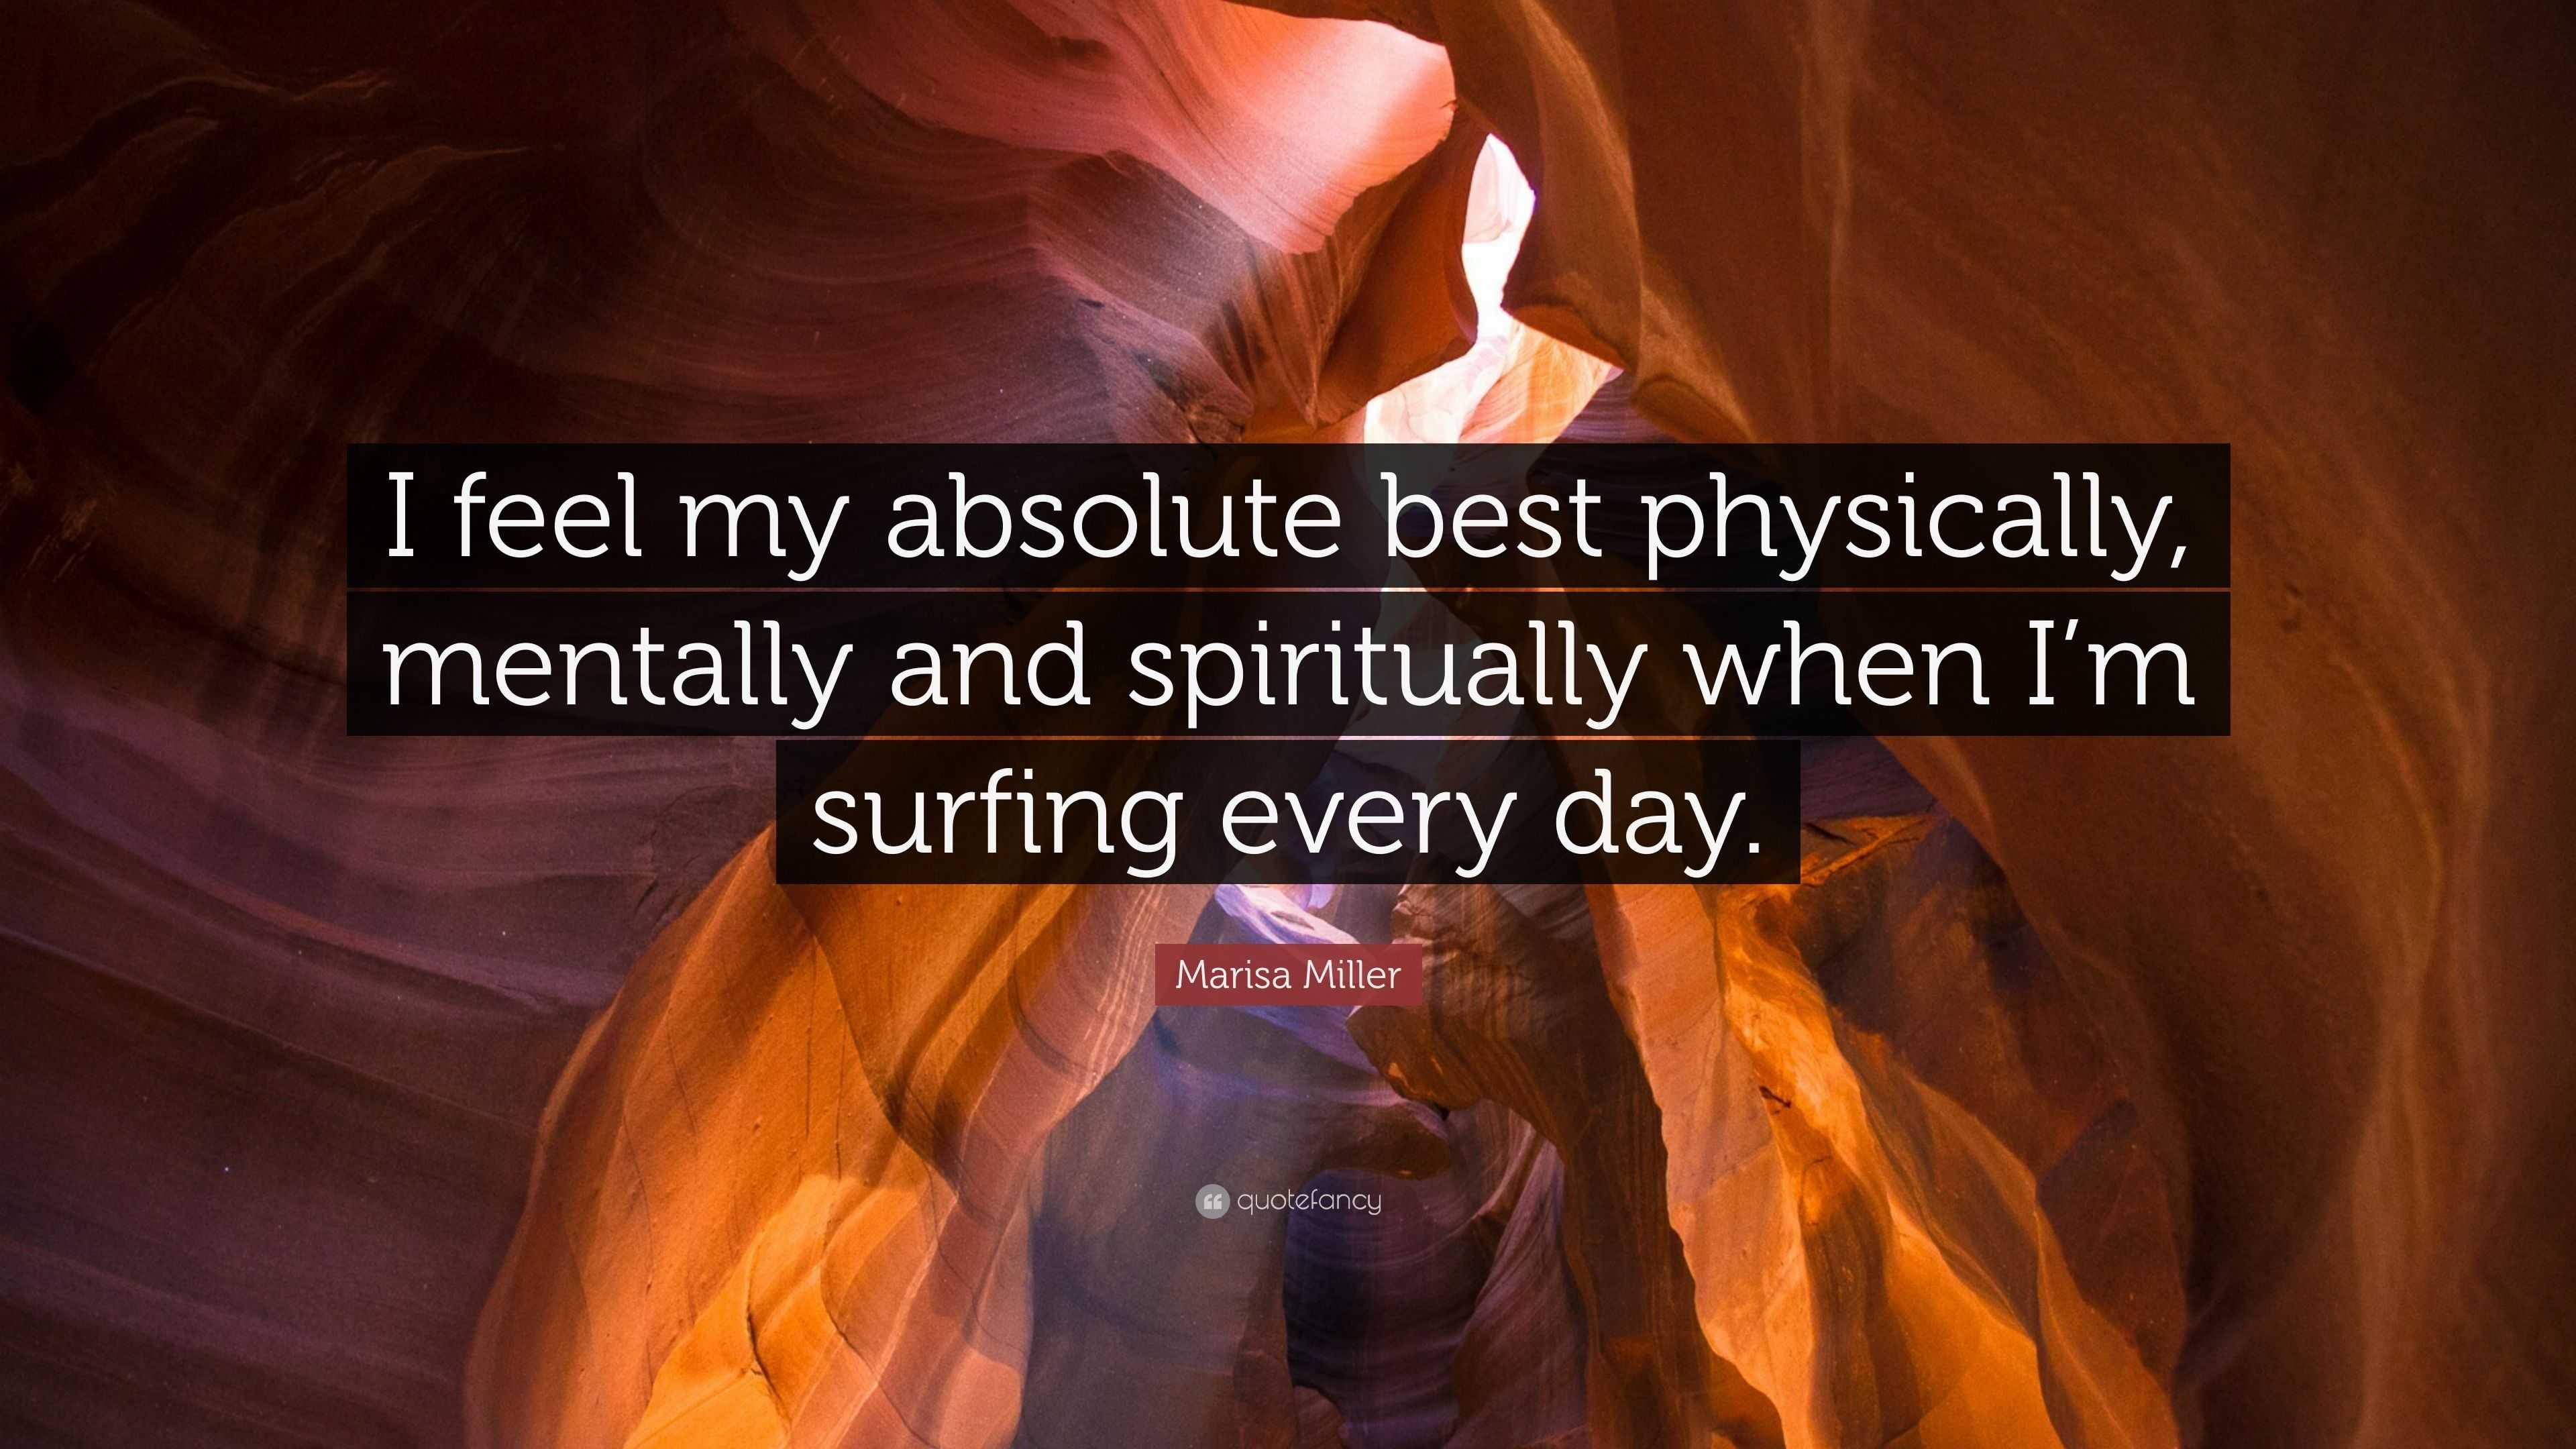 Marisa Miller Quote: “I feel my absolute best physically, mentally and  spiritually when I'm surfing